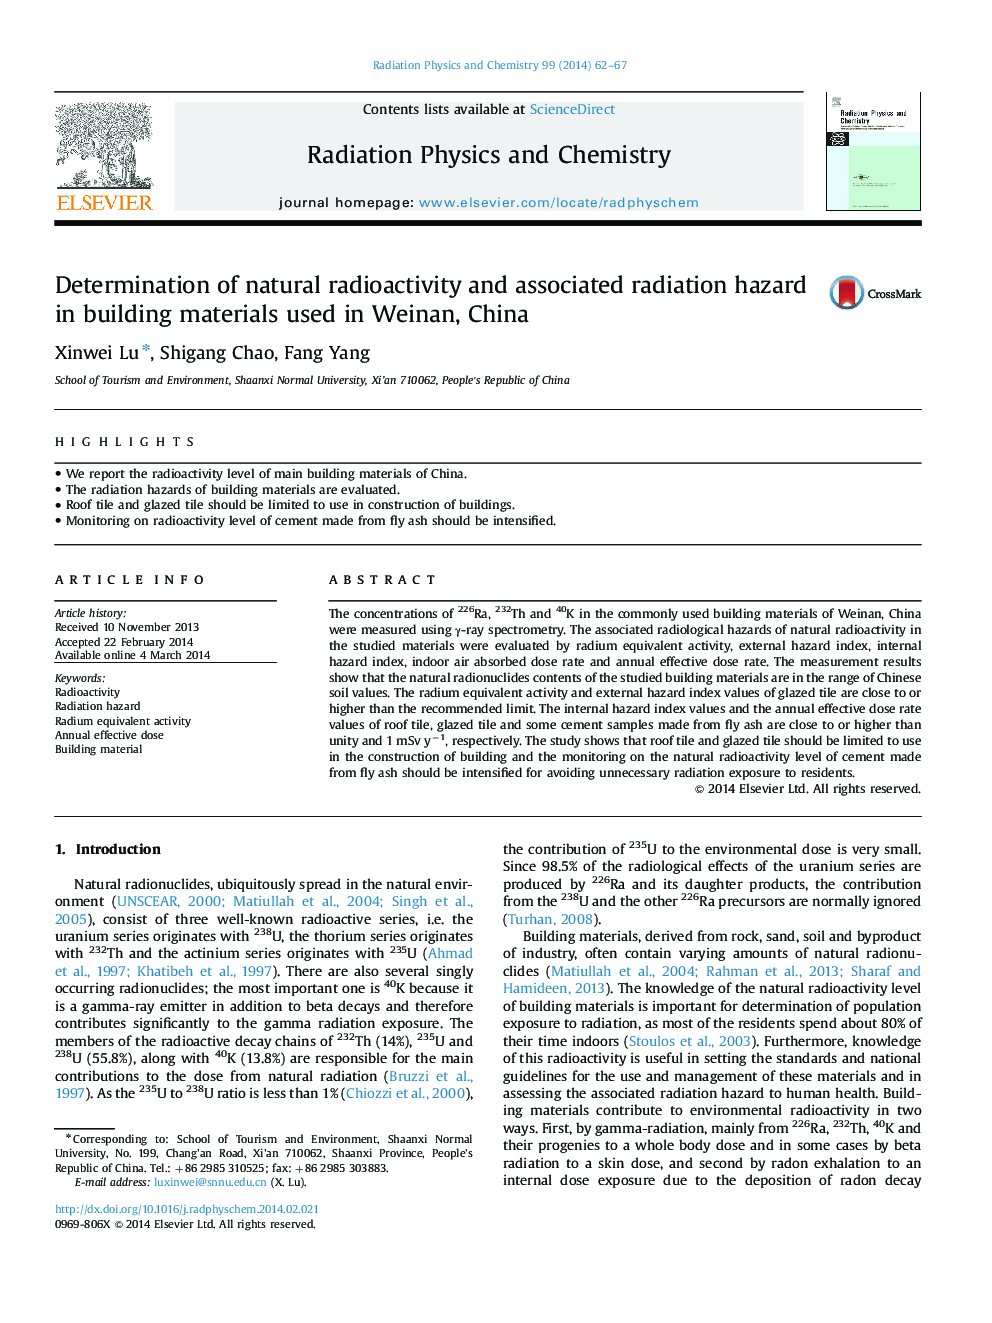 Determination of natural radioactivity and associated radiation hazard in building materials used in Weinan, China